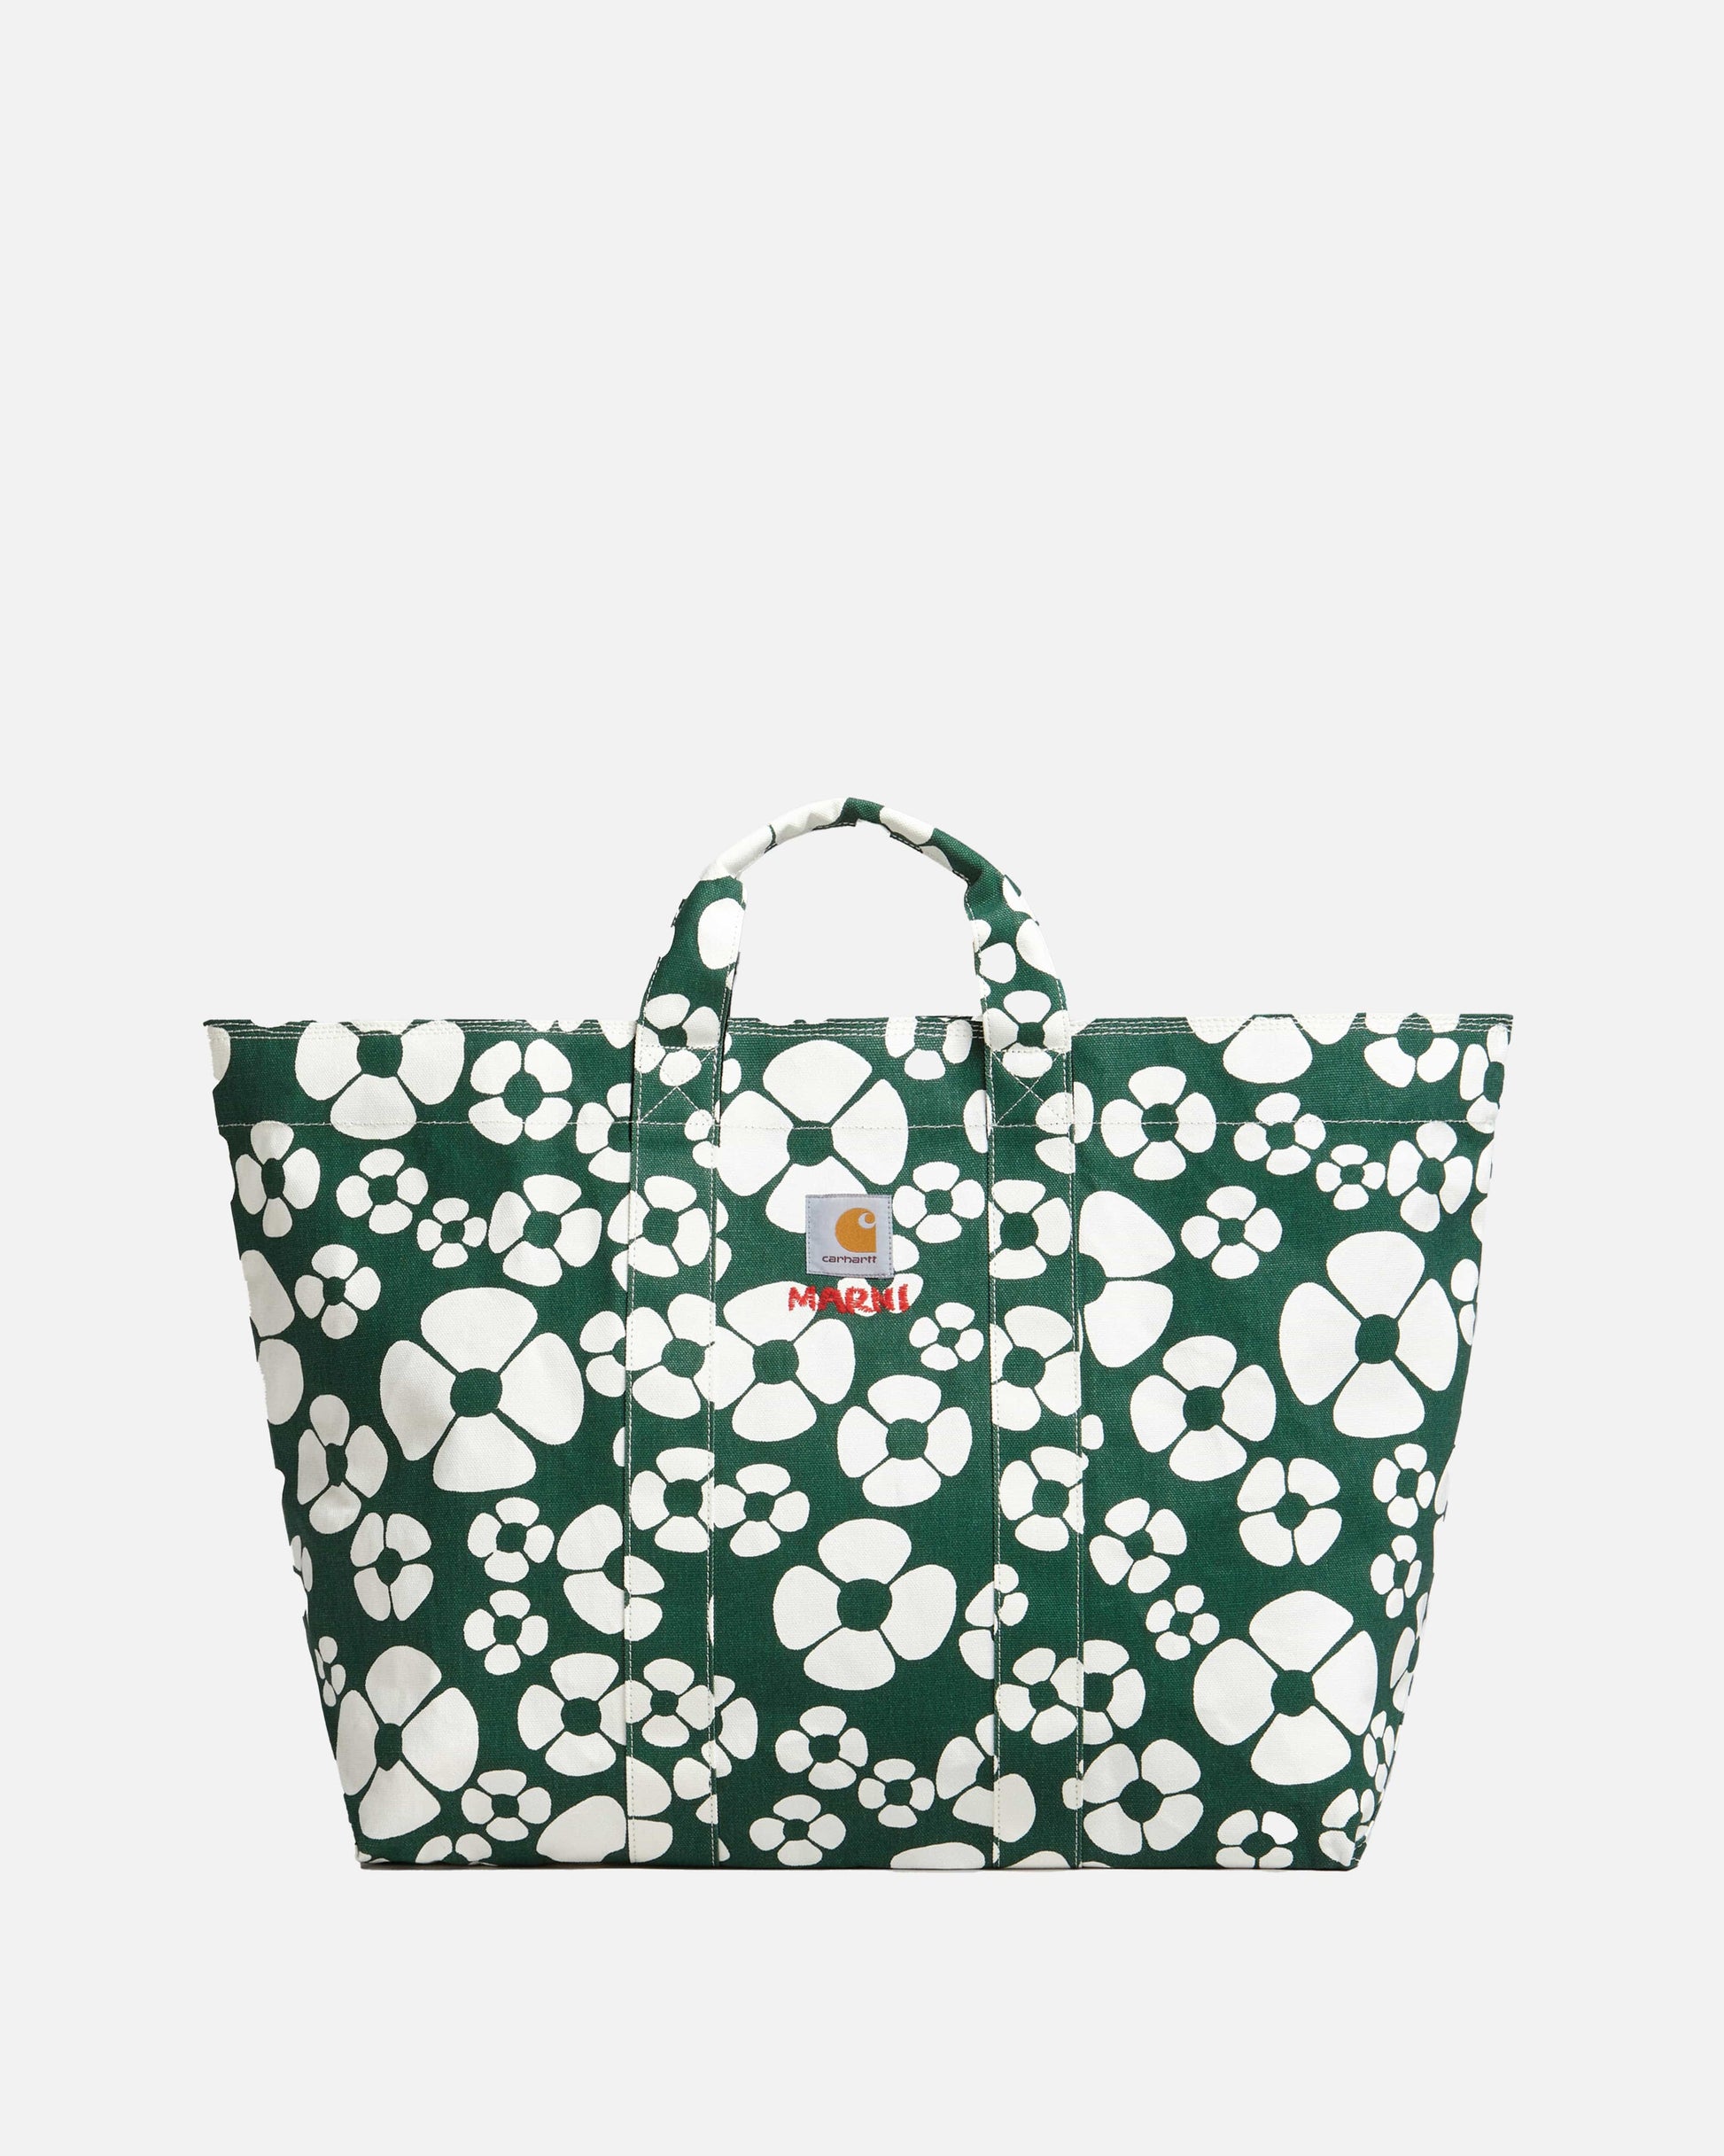 Marni Men's Bags Carhartt Canvas Tote Bag in Forest Green/Stone White